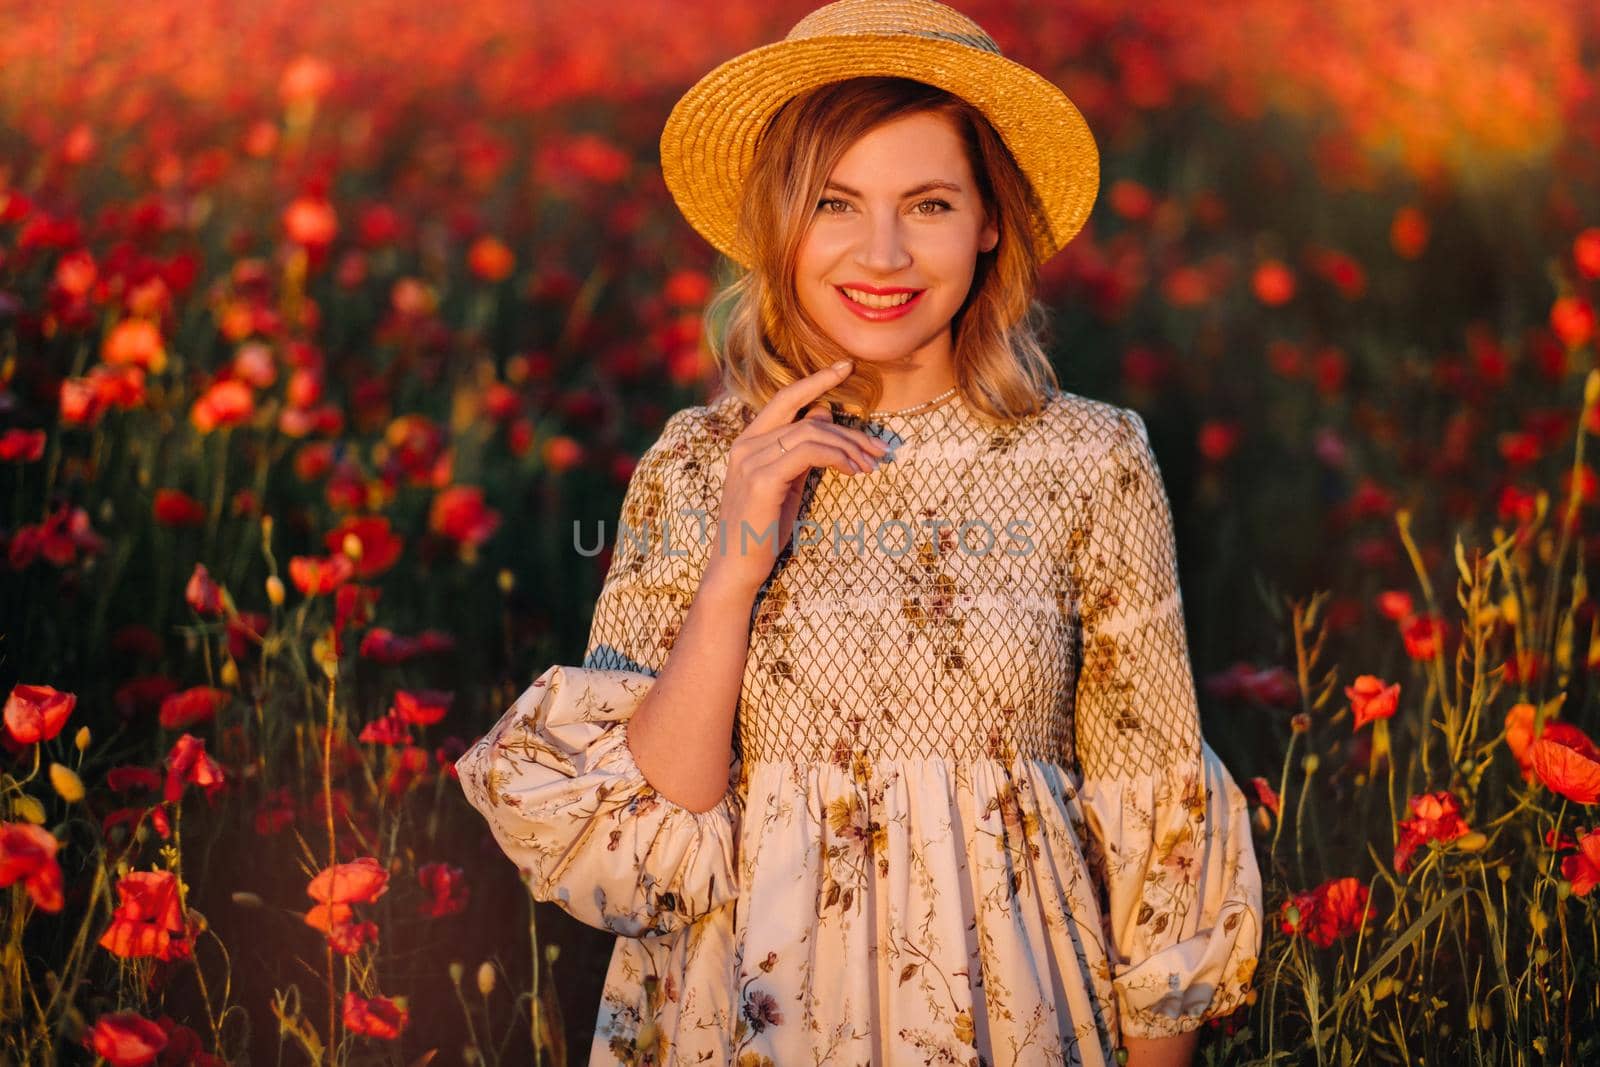 a girl in a dress, in a hat walks in a field with poppies at sunset.